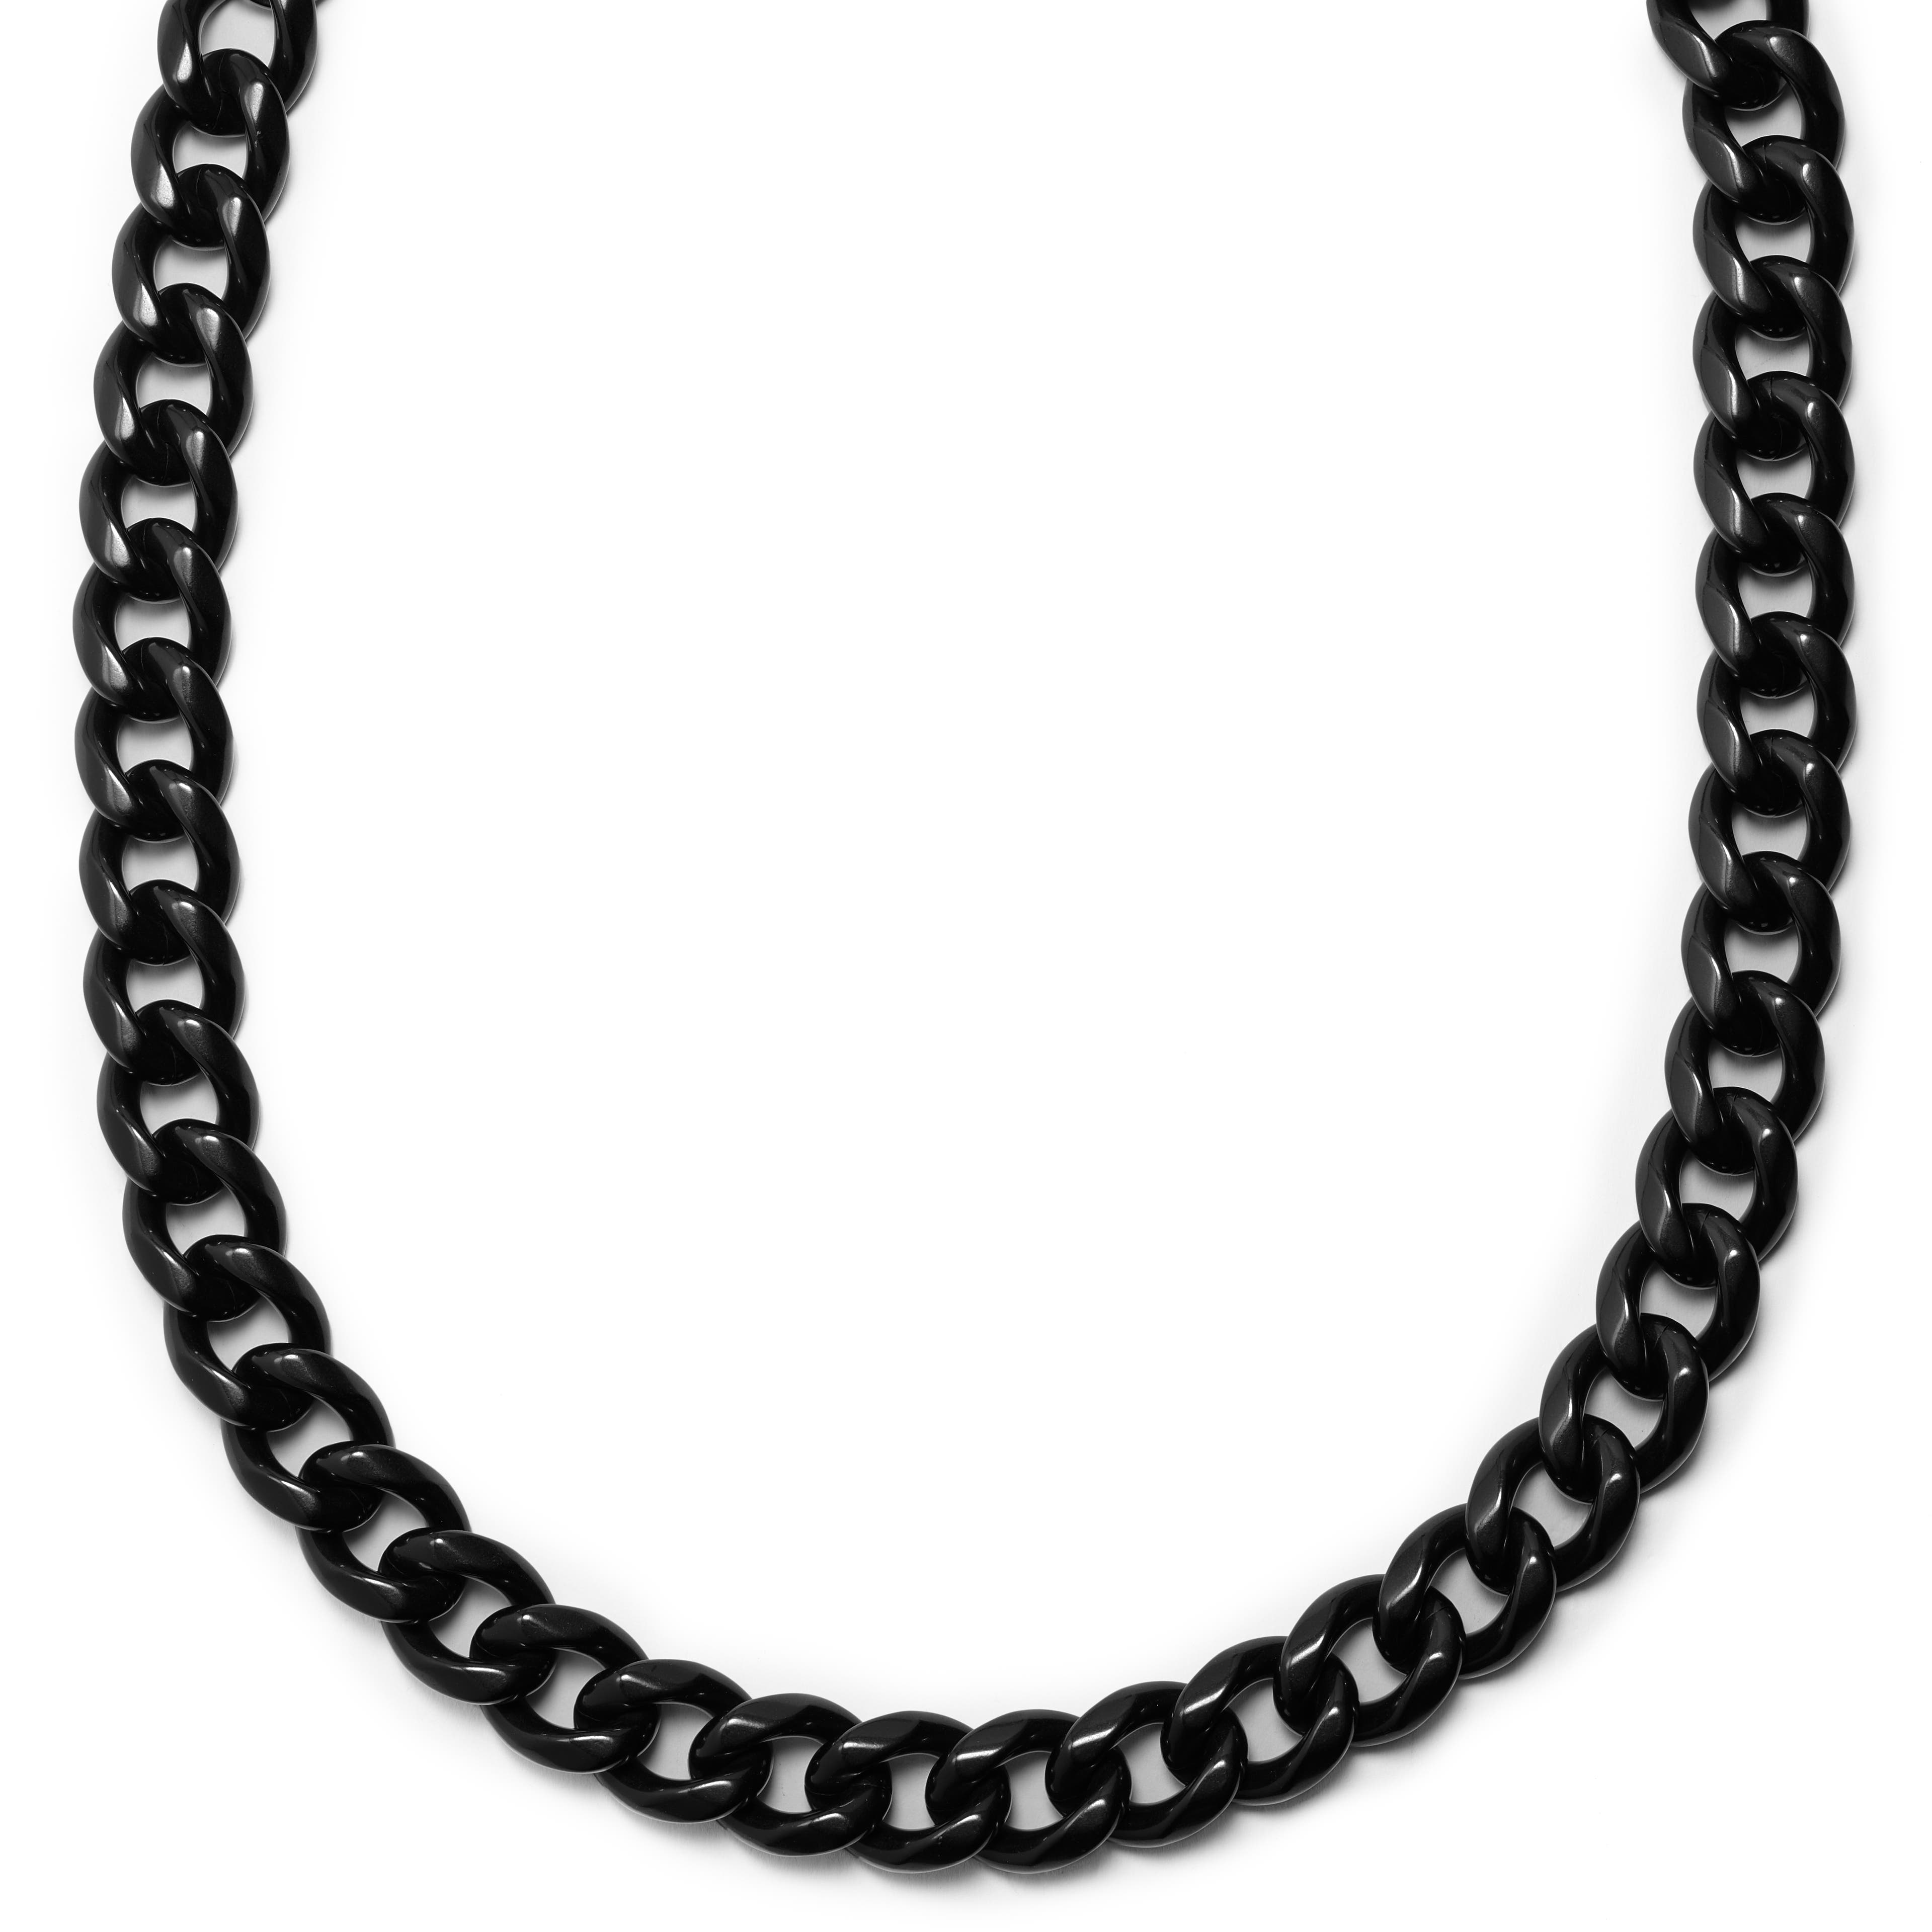 18 mm Black Stainless Steel Cuban Chain Necklace